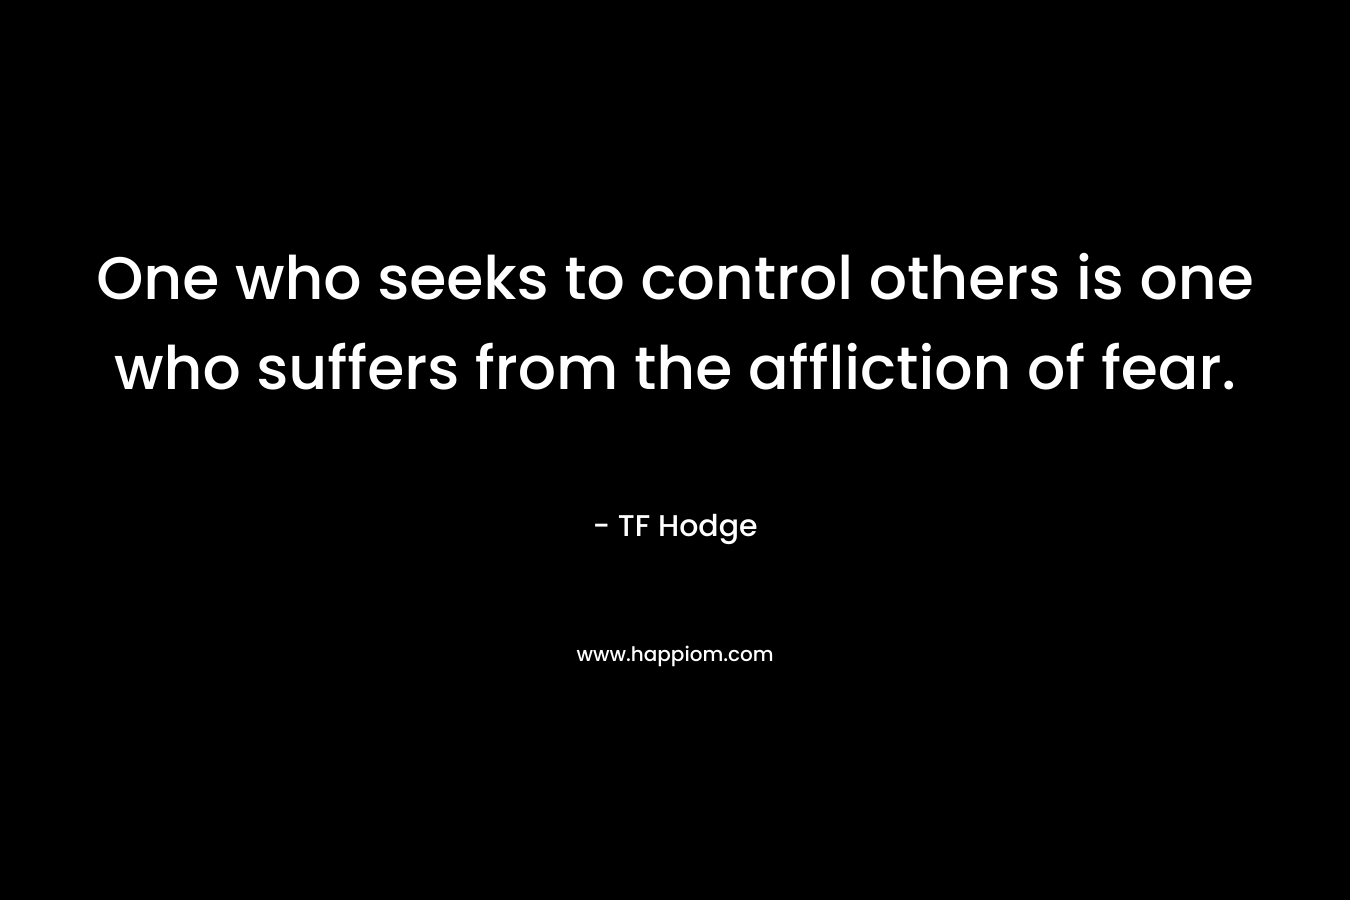 One who seeks to control others is one who suffers from the affliction of fear. – TF Hodge